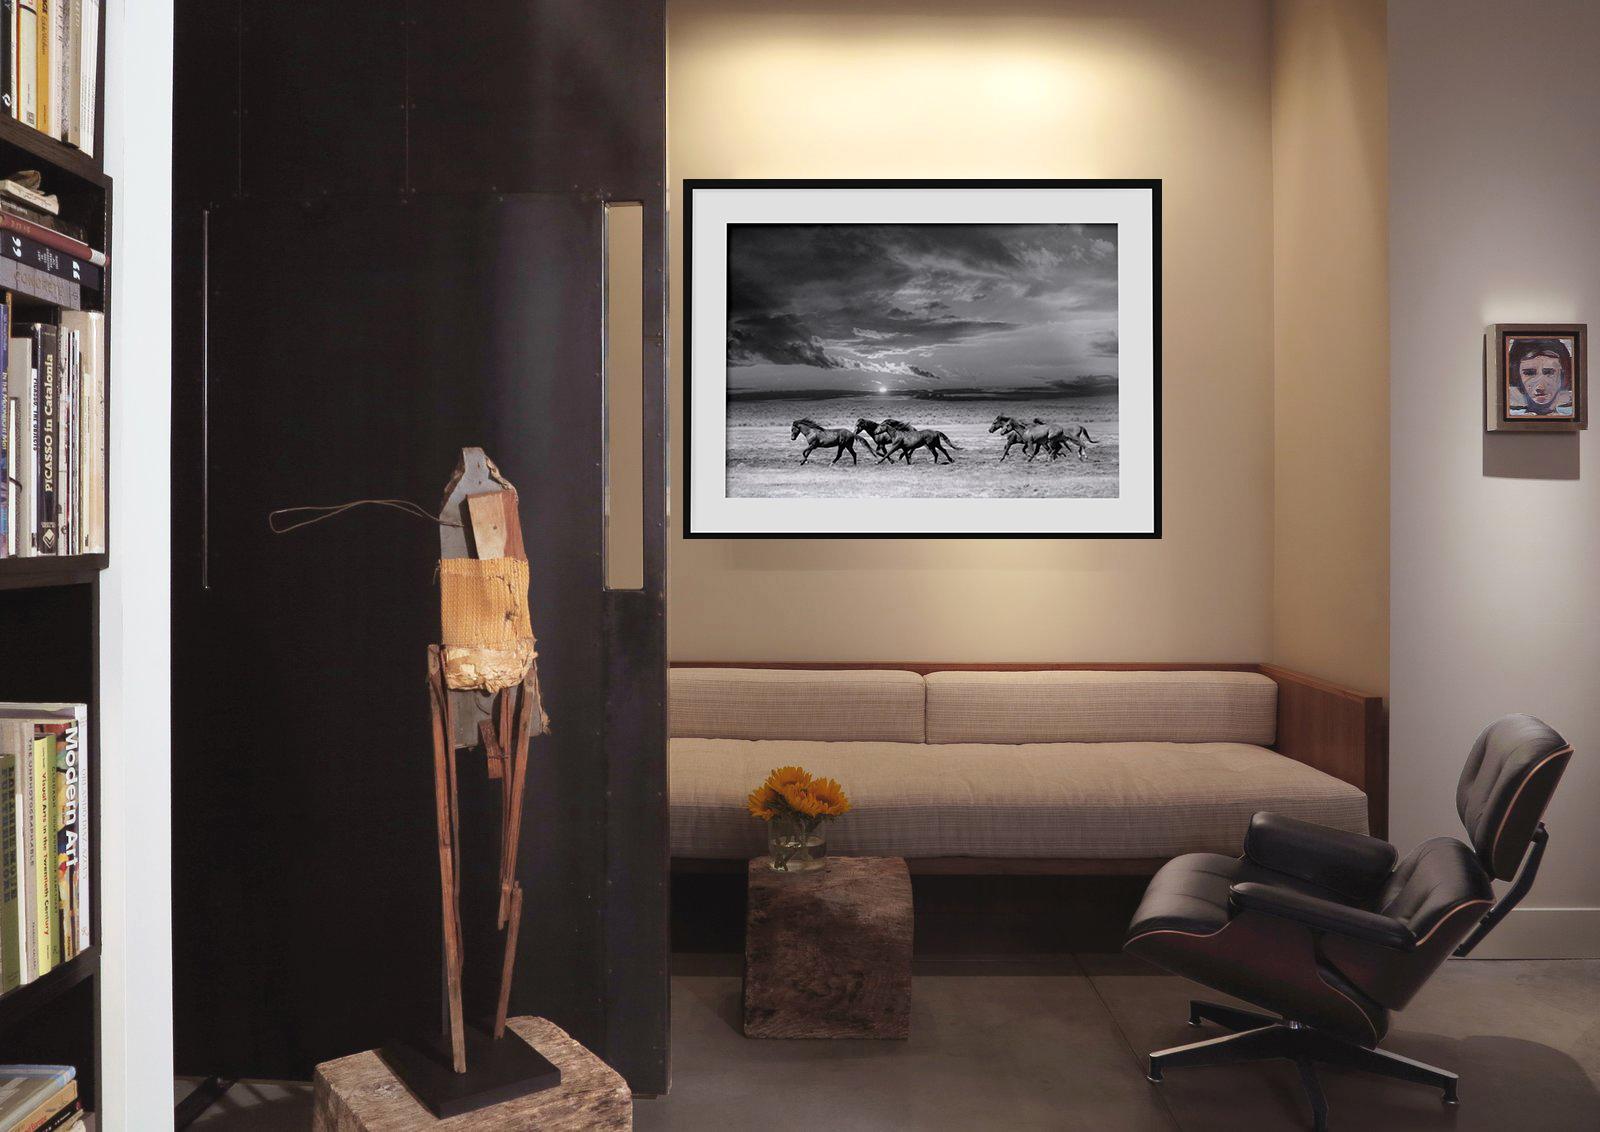  40x50 « Chasing the Light »  Photographie « Wild Horses Mustangs » non signée 1